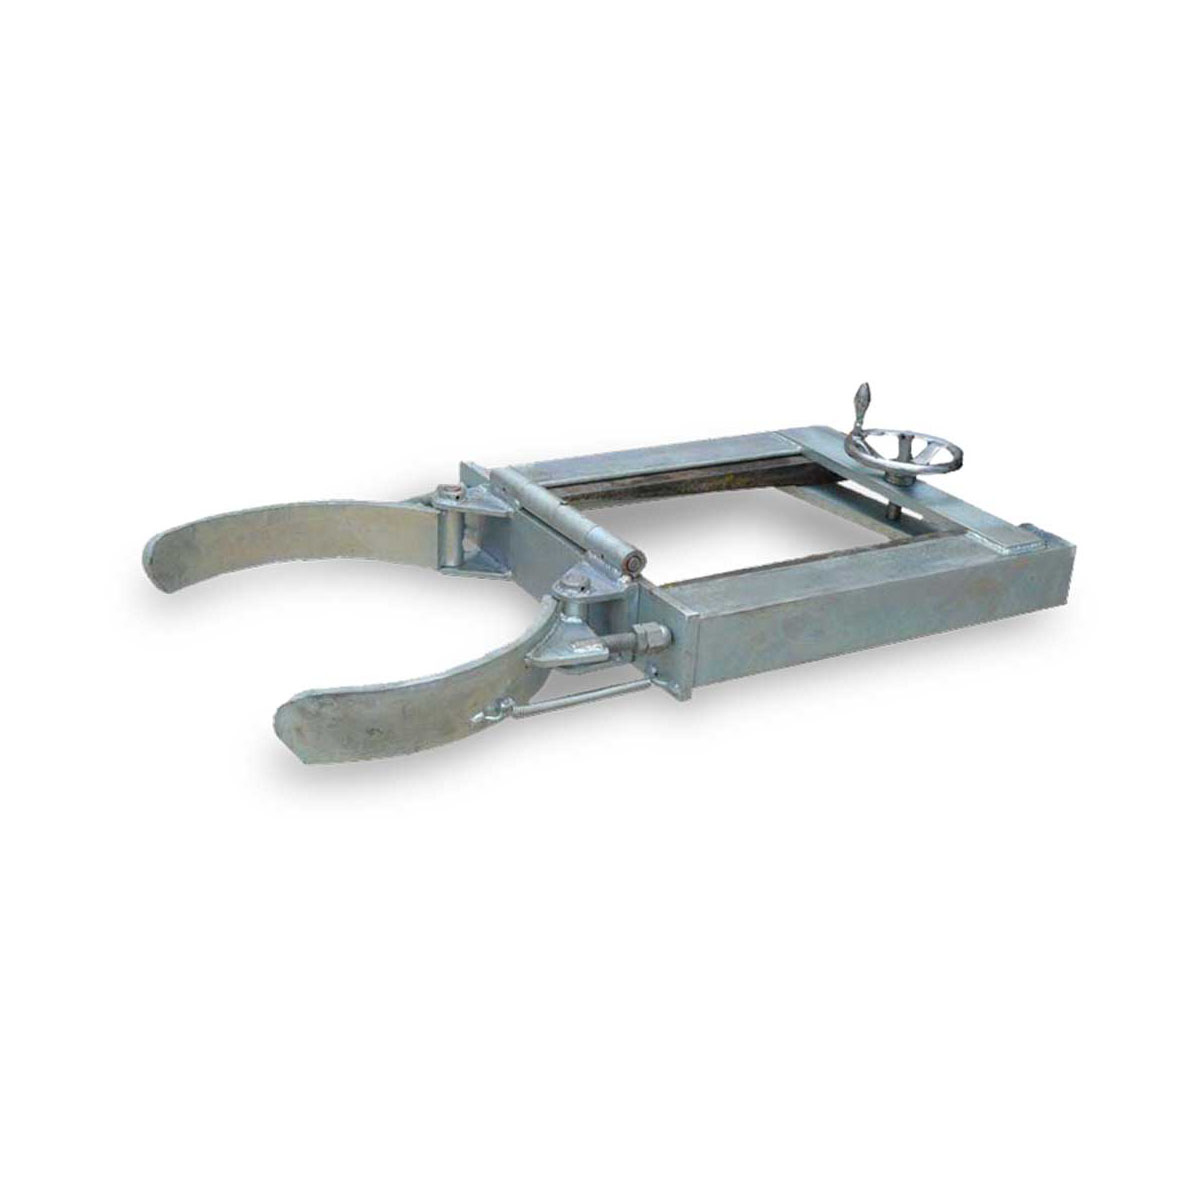 Buy Drum Lifter - Spade  available at Astrolift NZ